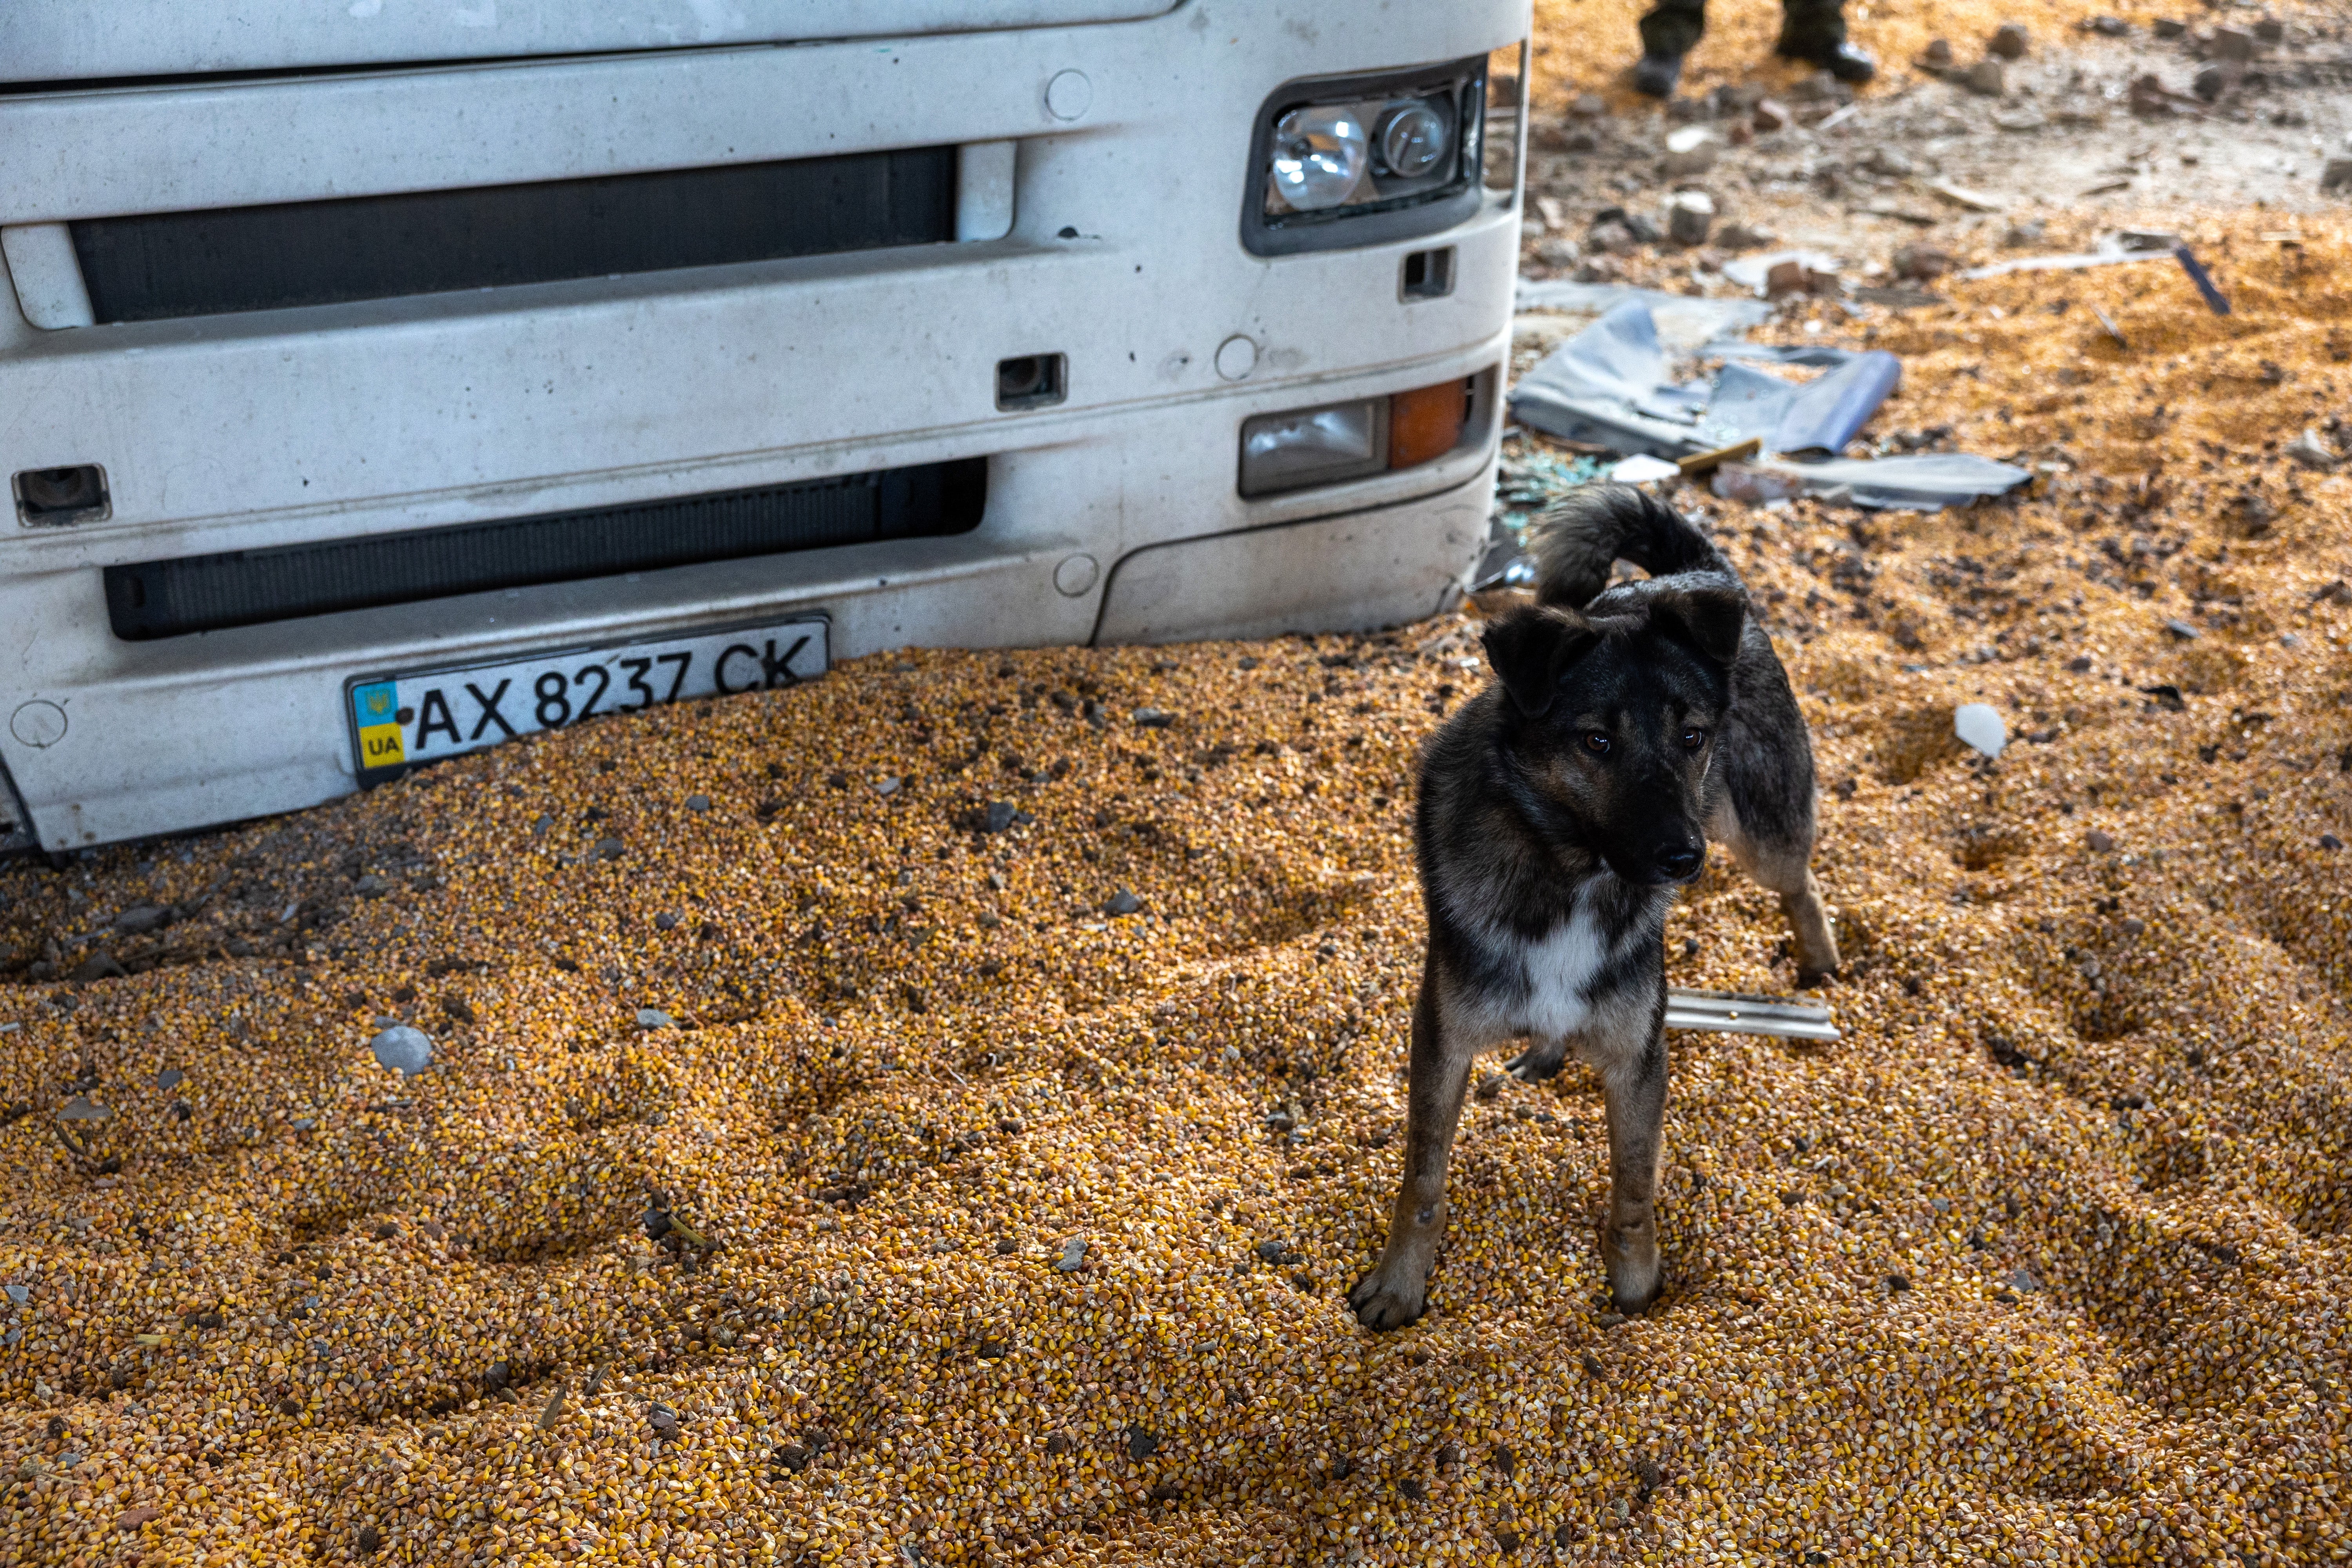 Russia has been accused of causing a food crisis by blocking Ukraine grain exports